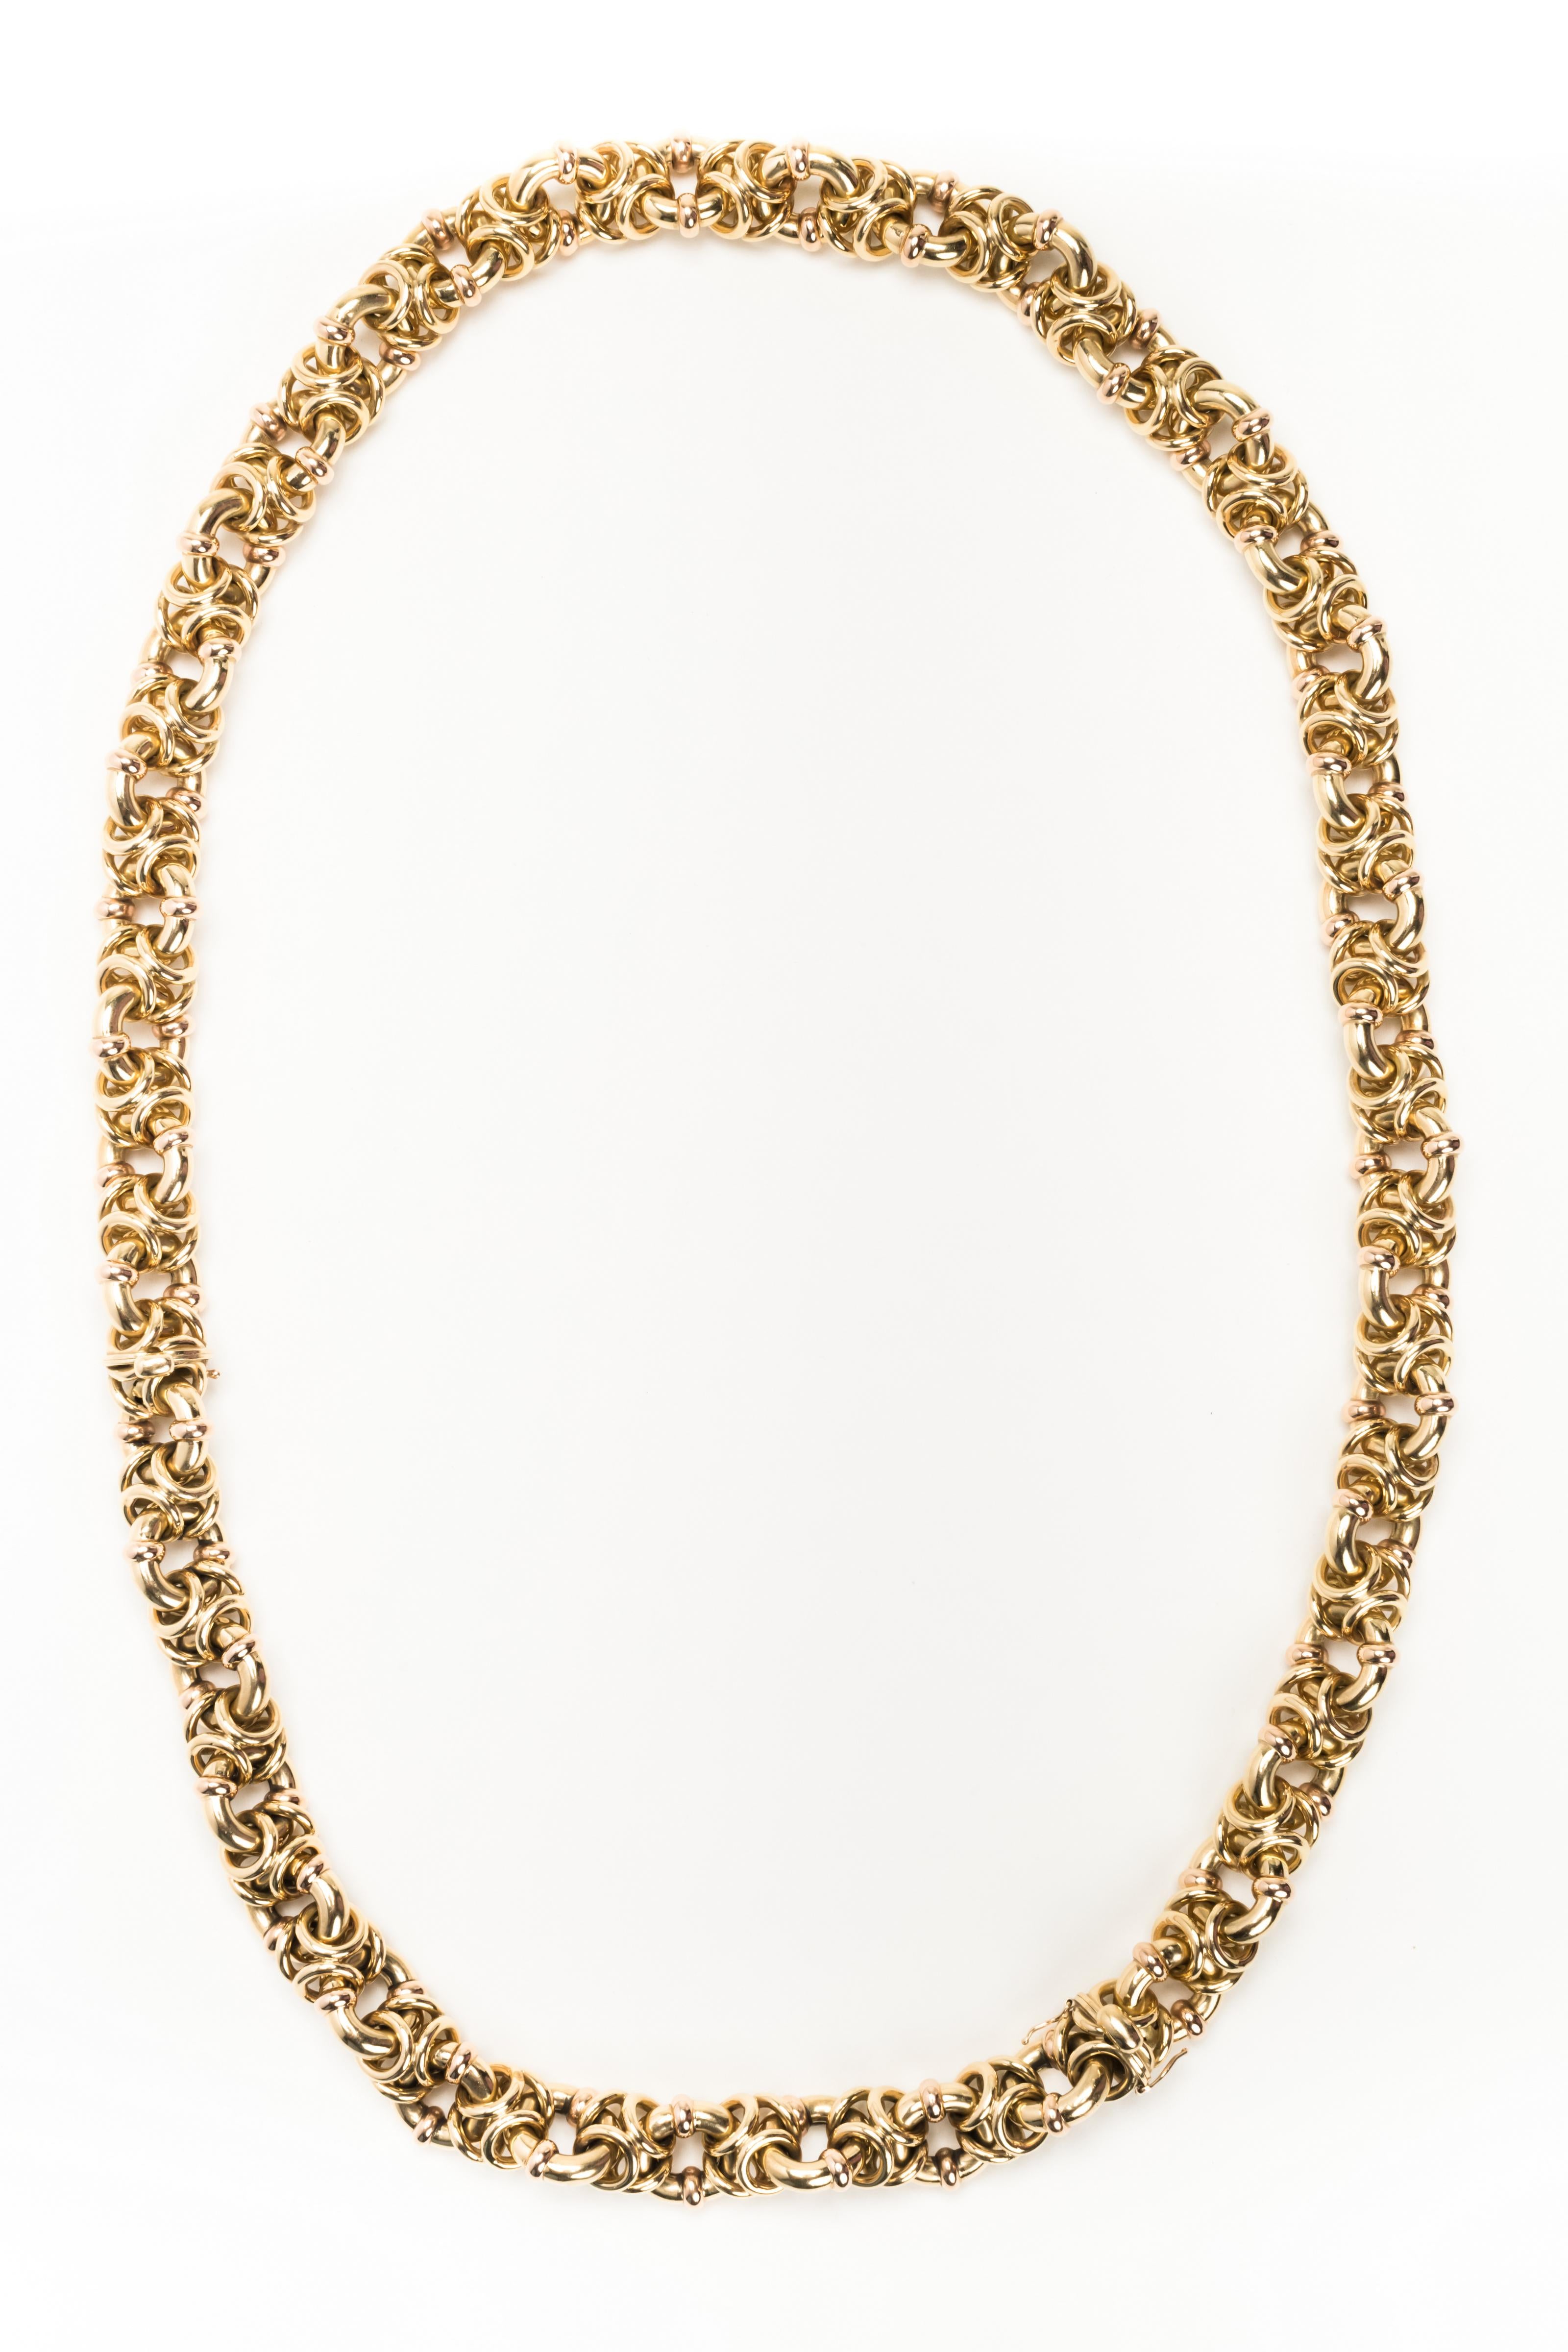 Intricate Italian multi-looped 18 karat gold necklace with detachable bracelet. Stamped 750.

Size: Total length: Necklace: 28